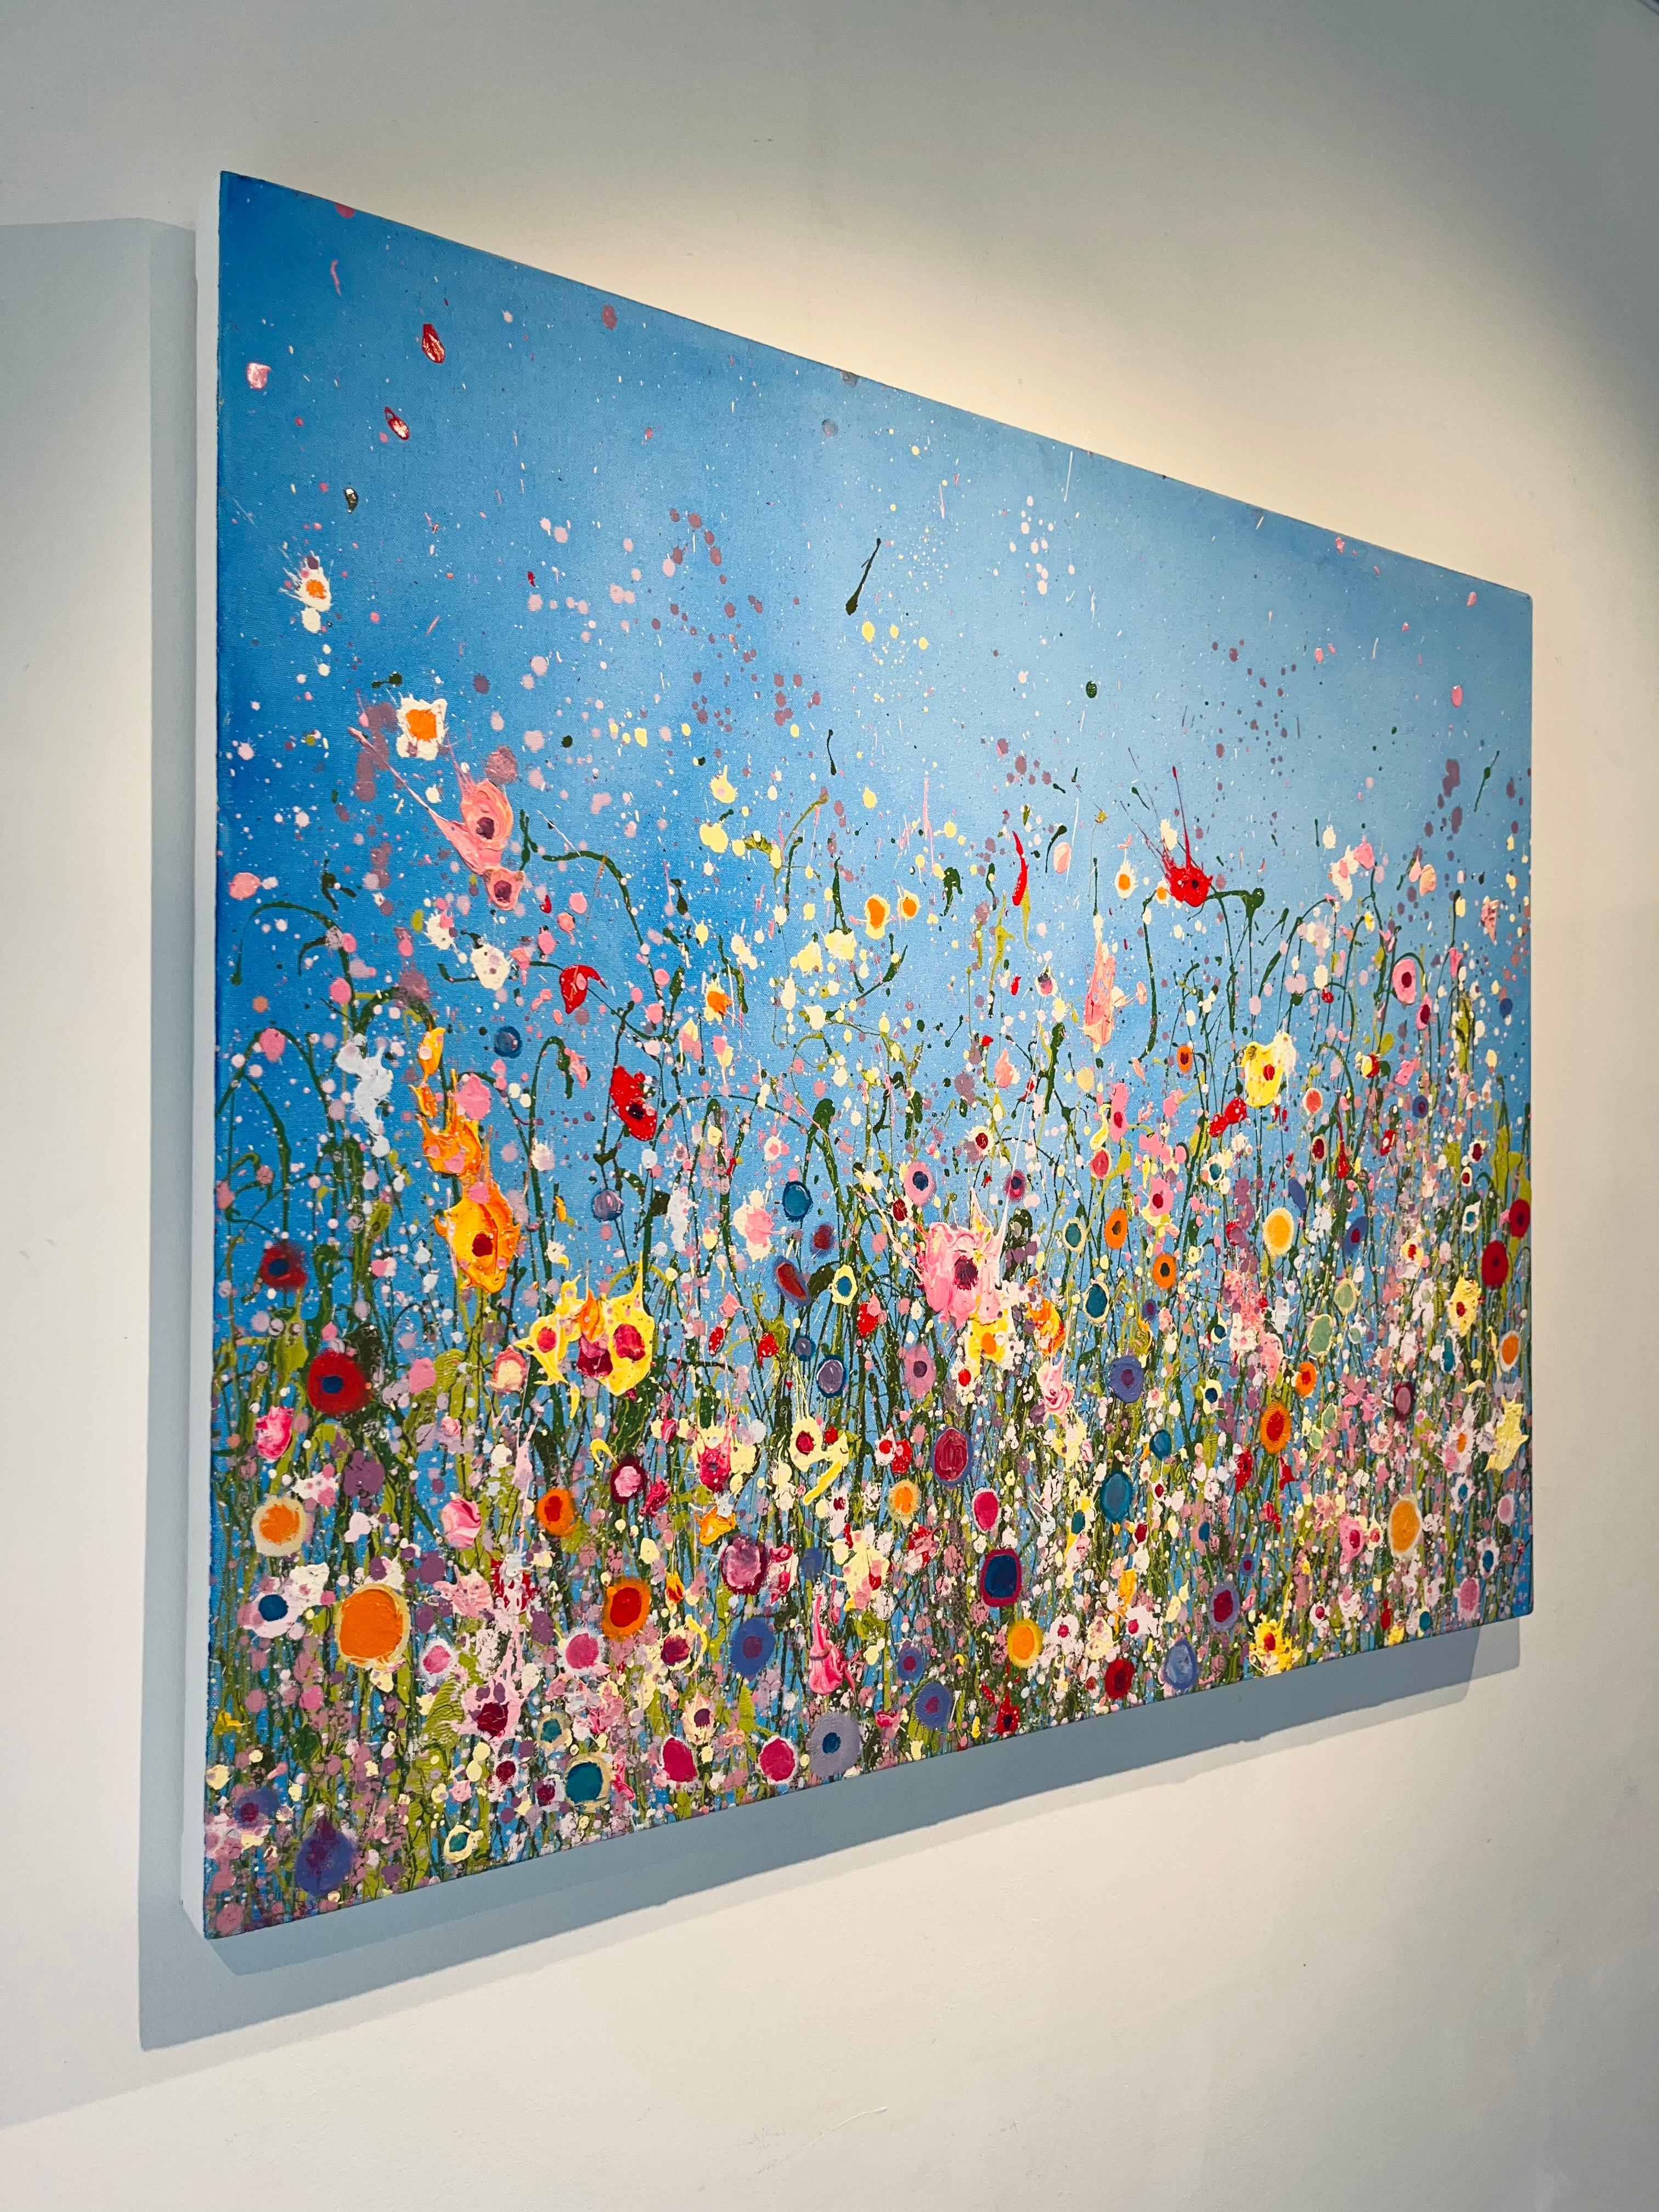 Summer Skies and Butterflies- original abstract floral oil painting- modern art - Naturalistic Painting by Yvonne Coomber